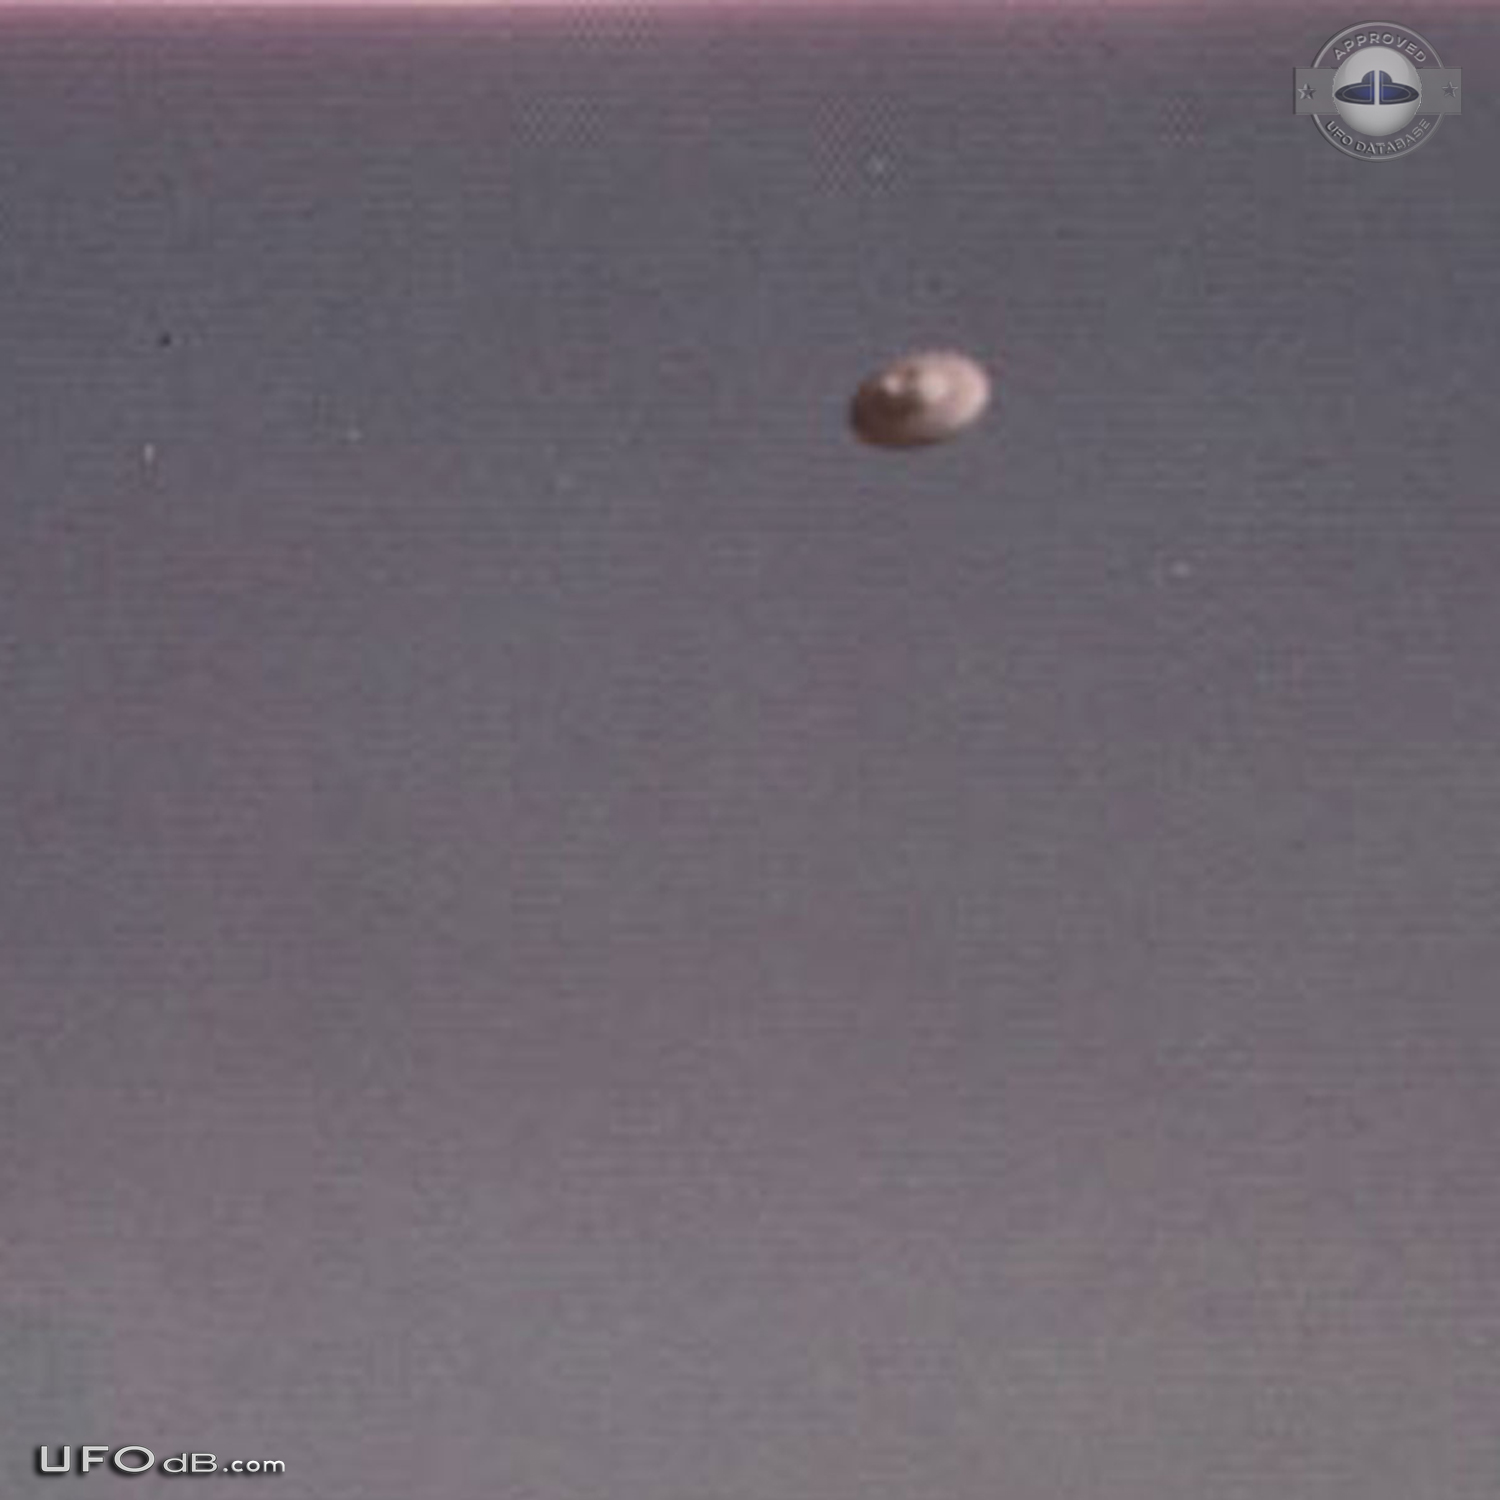 Famous Florida Uruguay UFO pictures sequence taken July 1977 UFO Picture #463-2